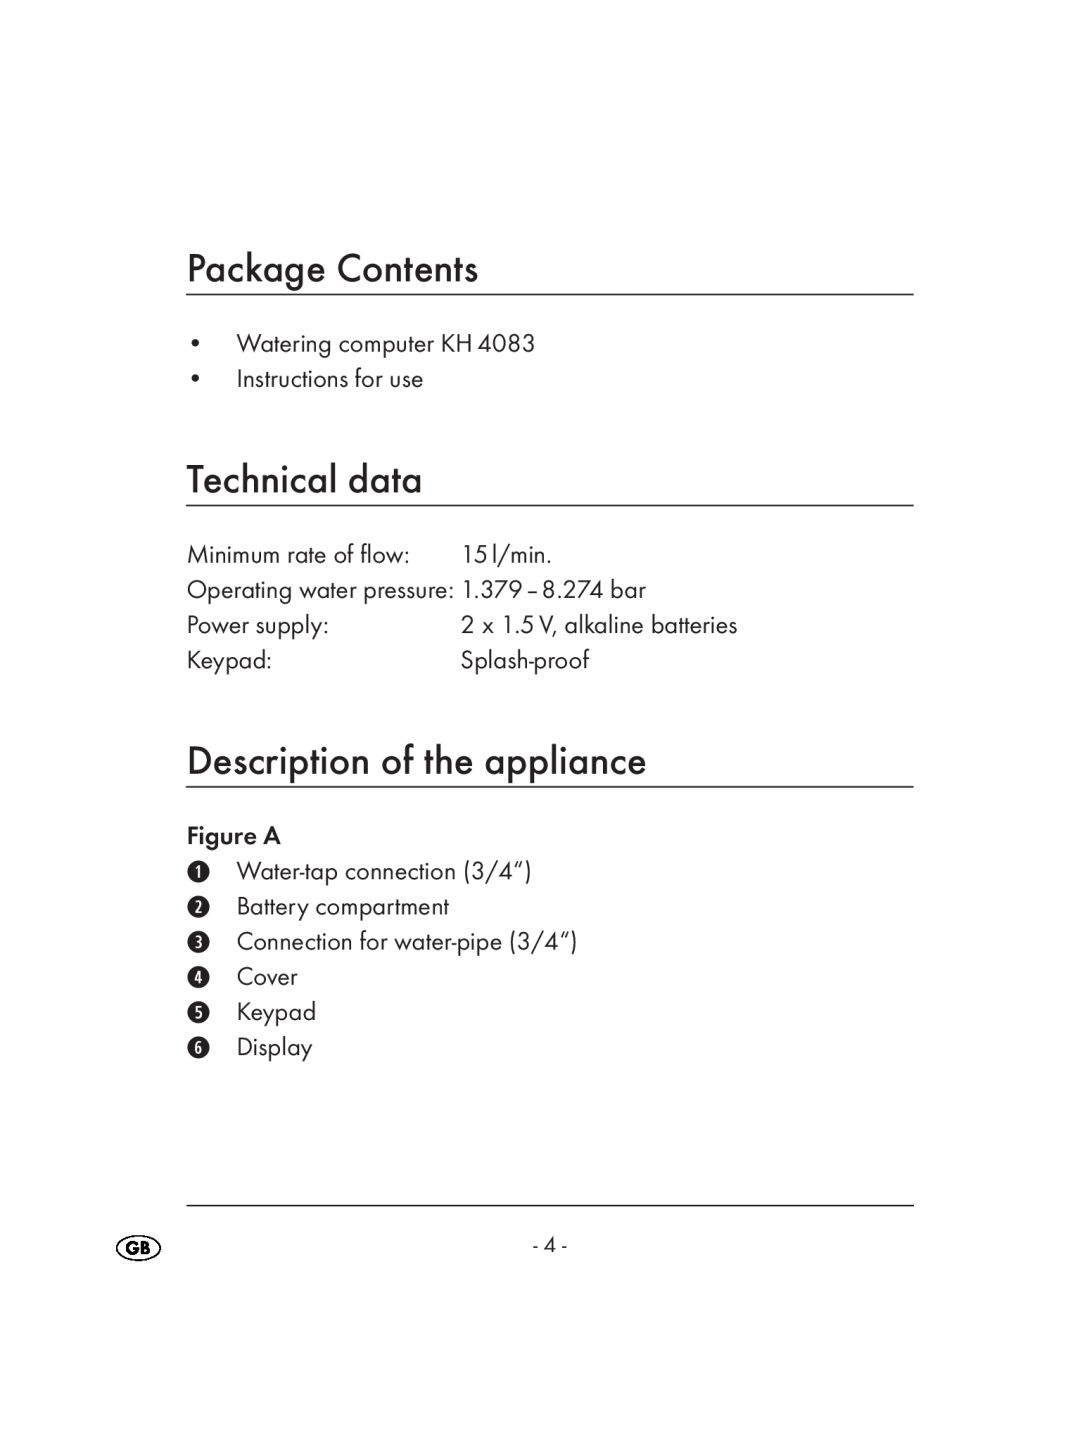 Kompernass KH 4083 manual Package Contents, Technical data, Description of the appliance 